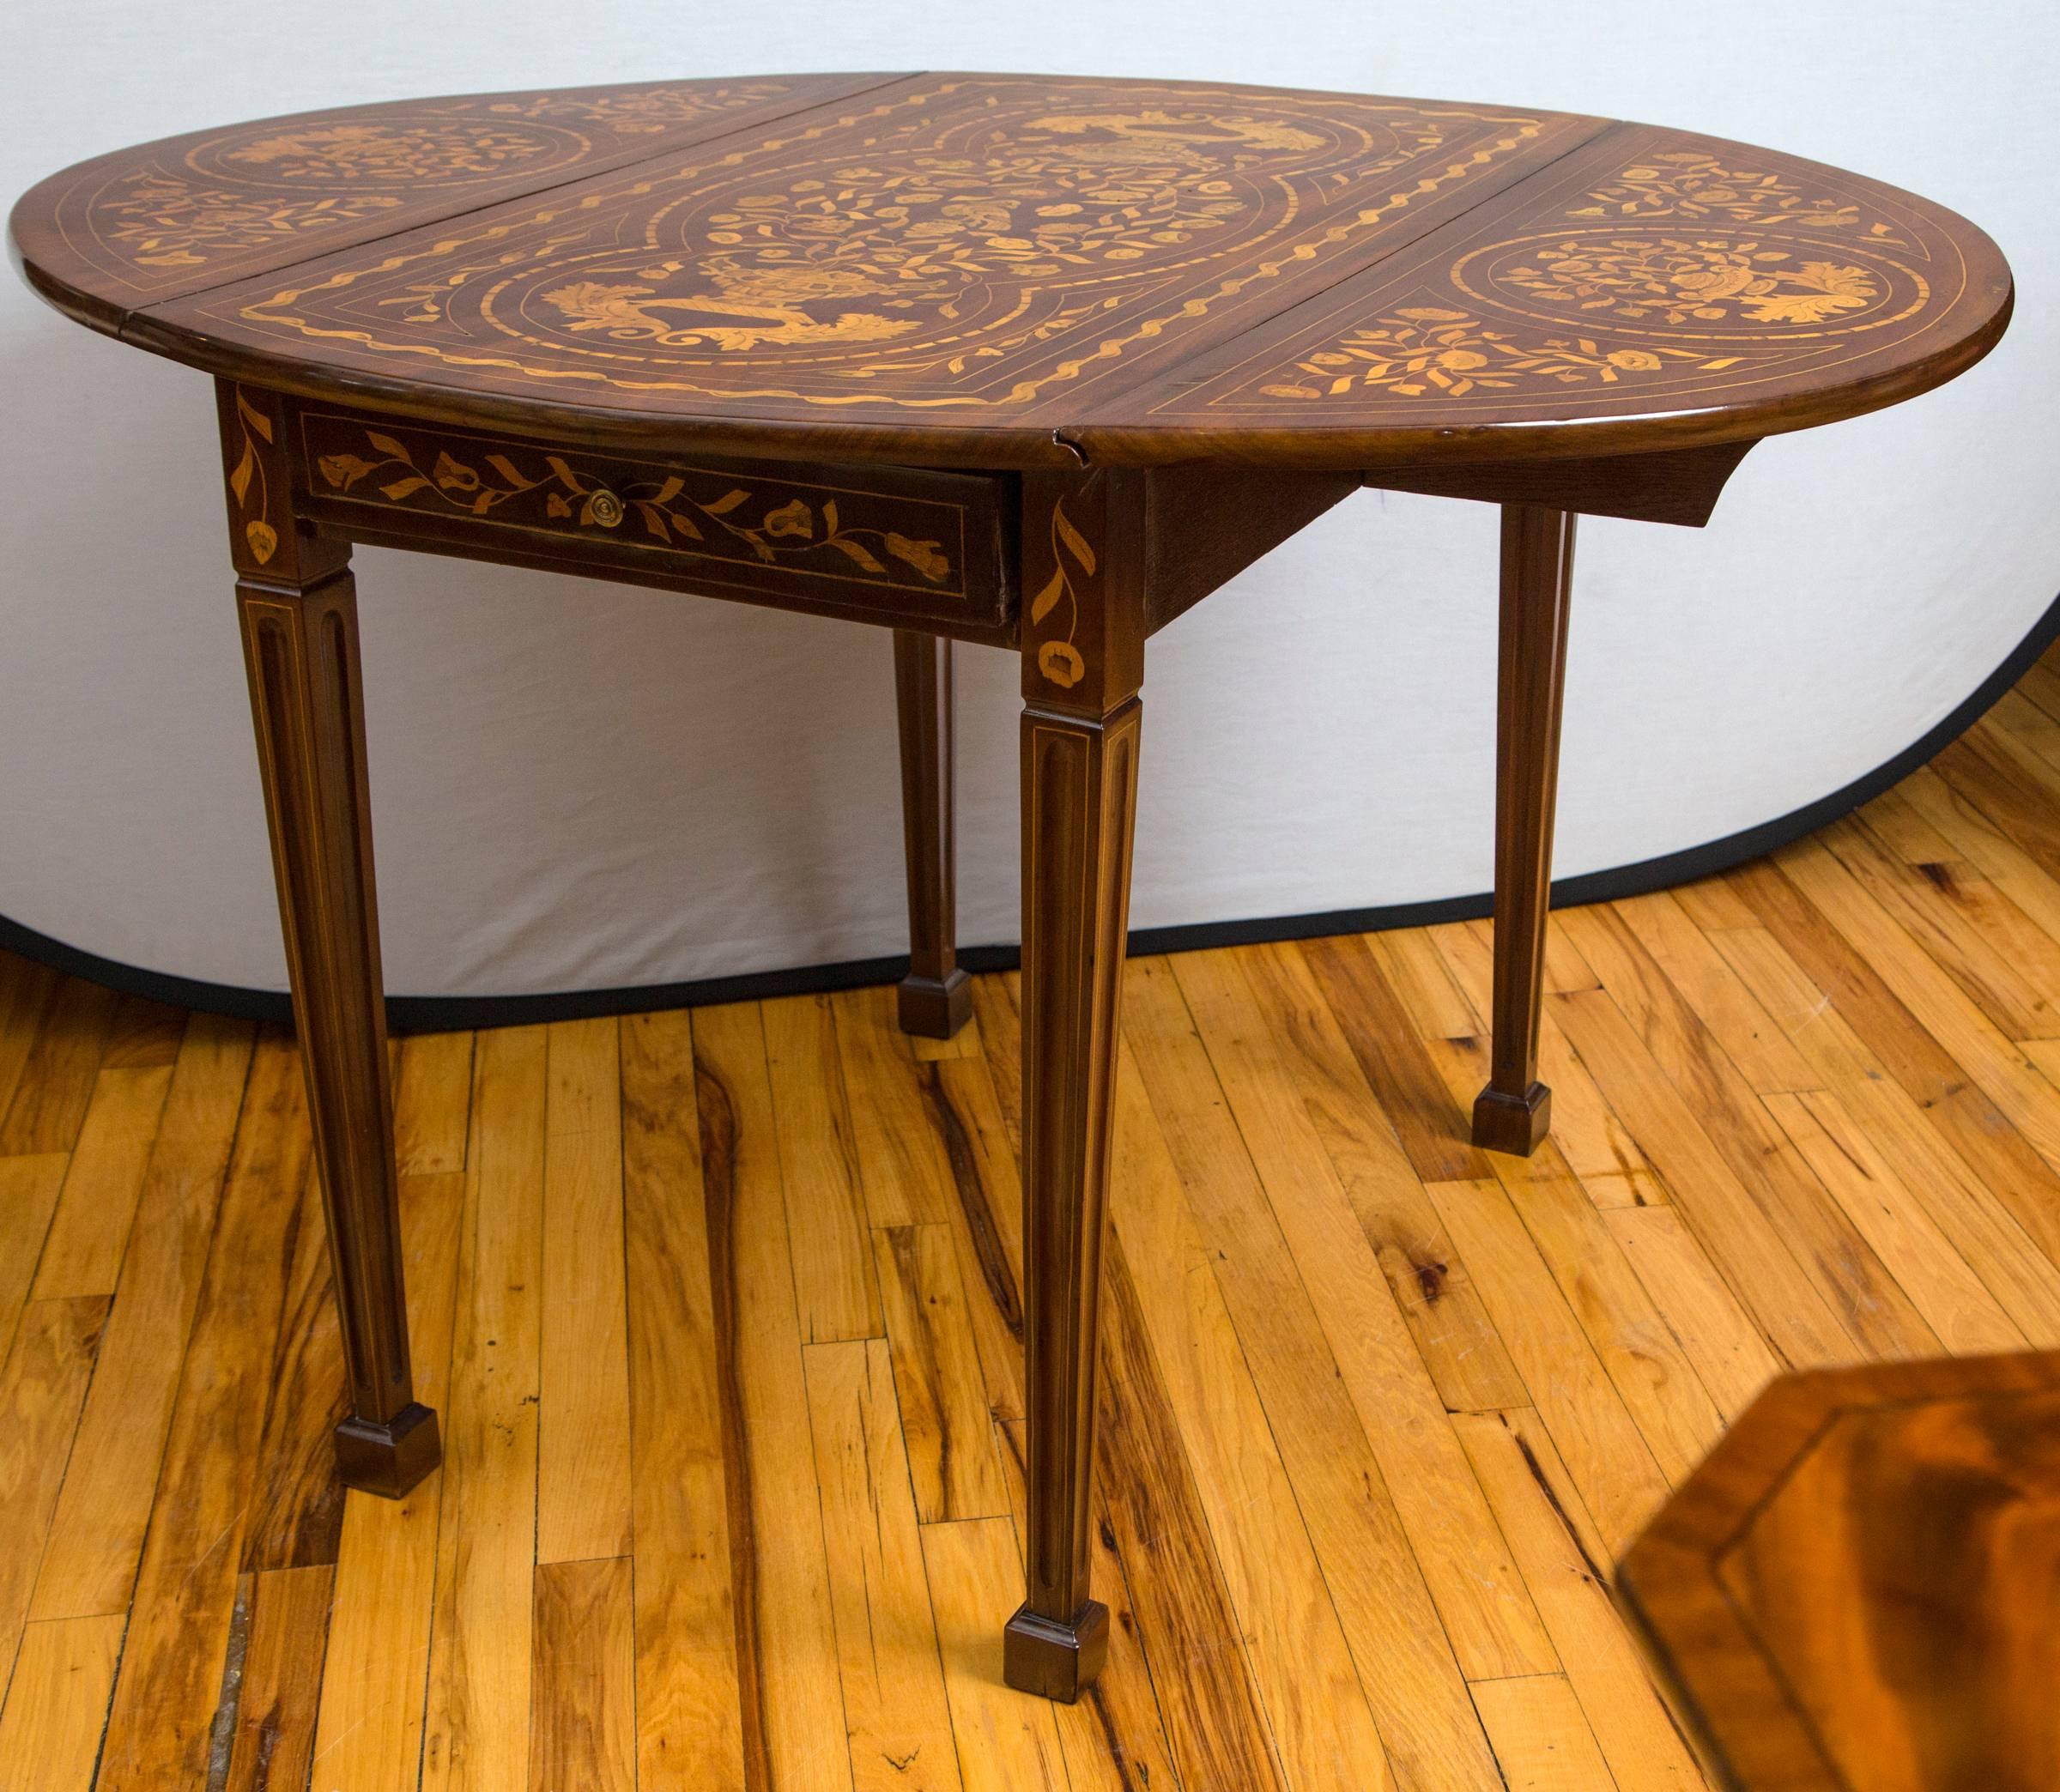 An extensively satinwood inlaid walnut drop-leaf table with tapered legs terminating in spade feet. I single long drawer opens on either end. When leaves are up the table is an oval of 46.5 inches in width. Measurements listed are at the leaves